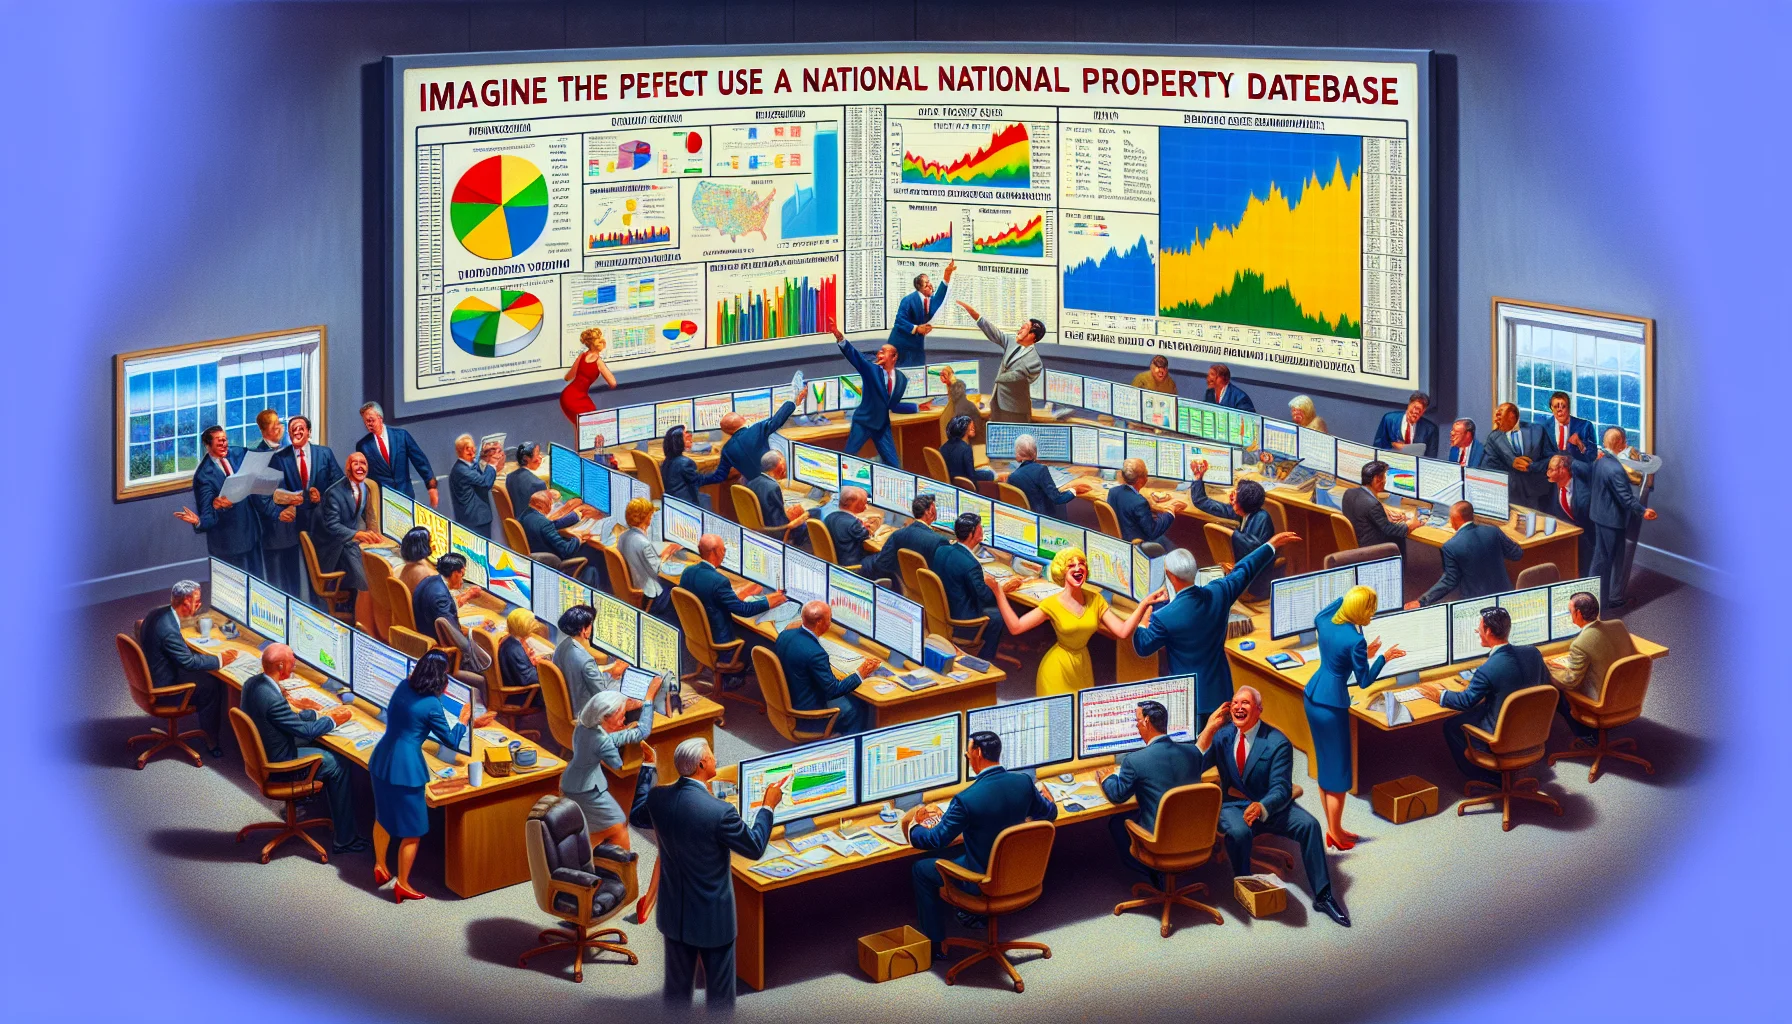 Imagine a satirical, yet realistic scenario emphasizing the perfect use of a national property database in real estate. Display a bustling office, with busy professionals from various descents like Caucasian, Hispanic, and Middle-Eastern, both men and women. They're examining large screens filled with colorful charts, maps, and figures while holding meetings and discussions. Some point enthusiastically at a graph showing a perfect correlation, symbolizing ideal property valuation. Others are laughing while sifting through an impeccably organized database, a nod to perfect data management. Everything in the office seems efficient and in harmony, a utopian view of real-estate affairs.